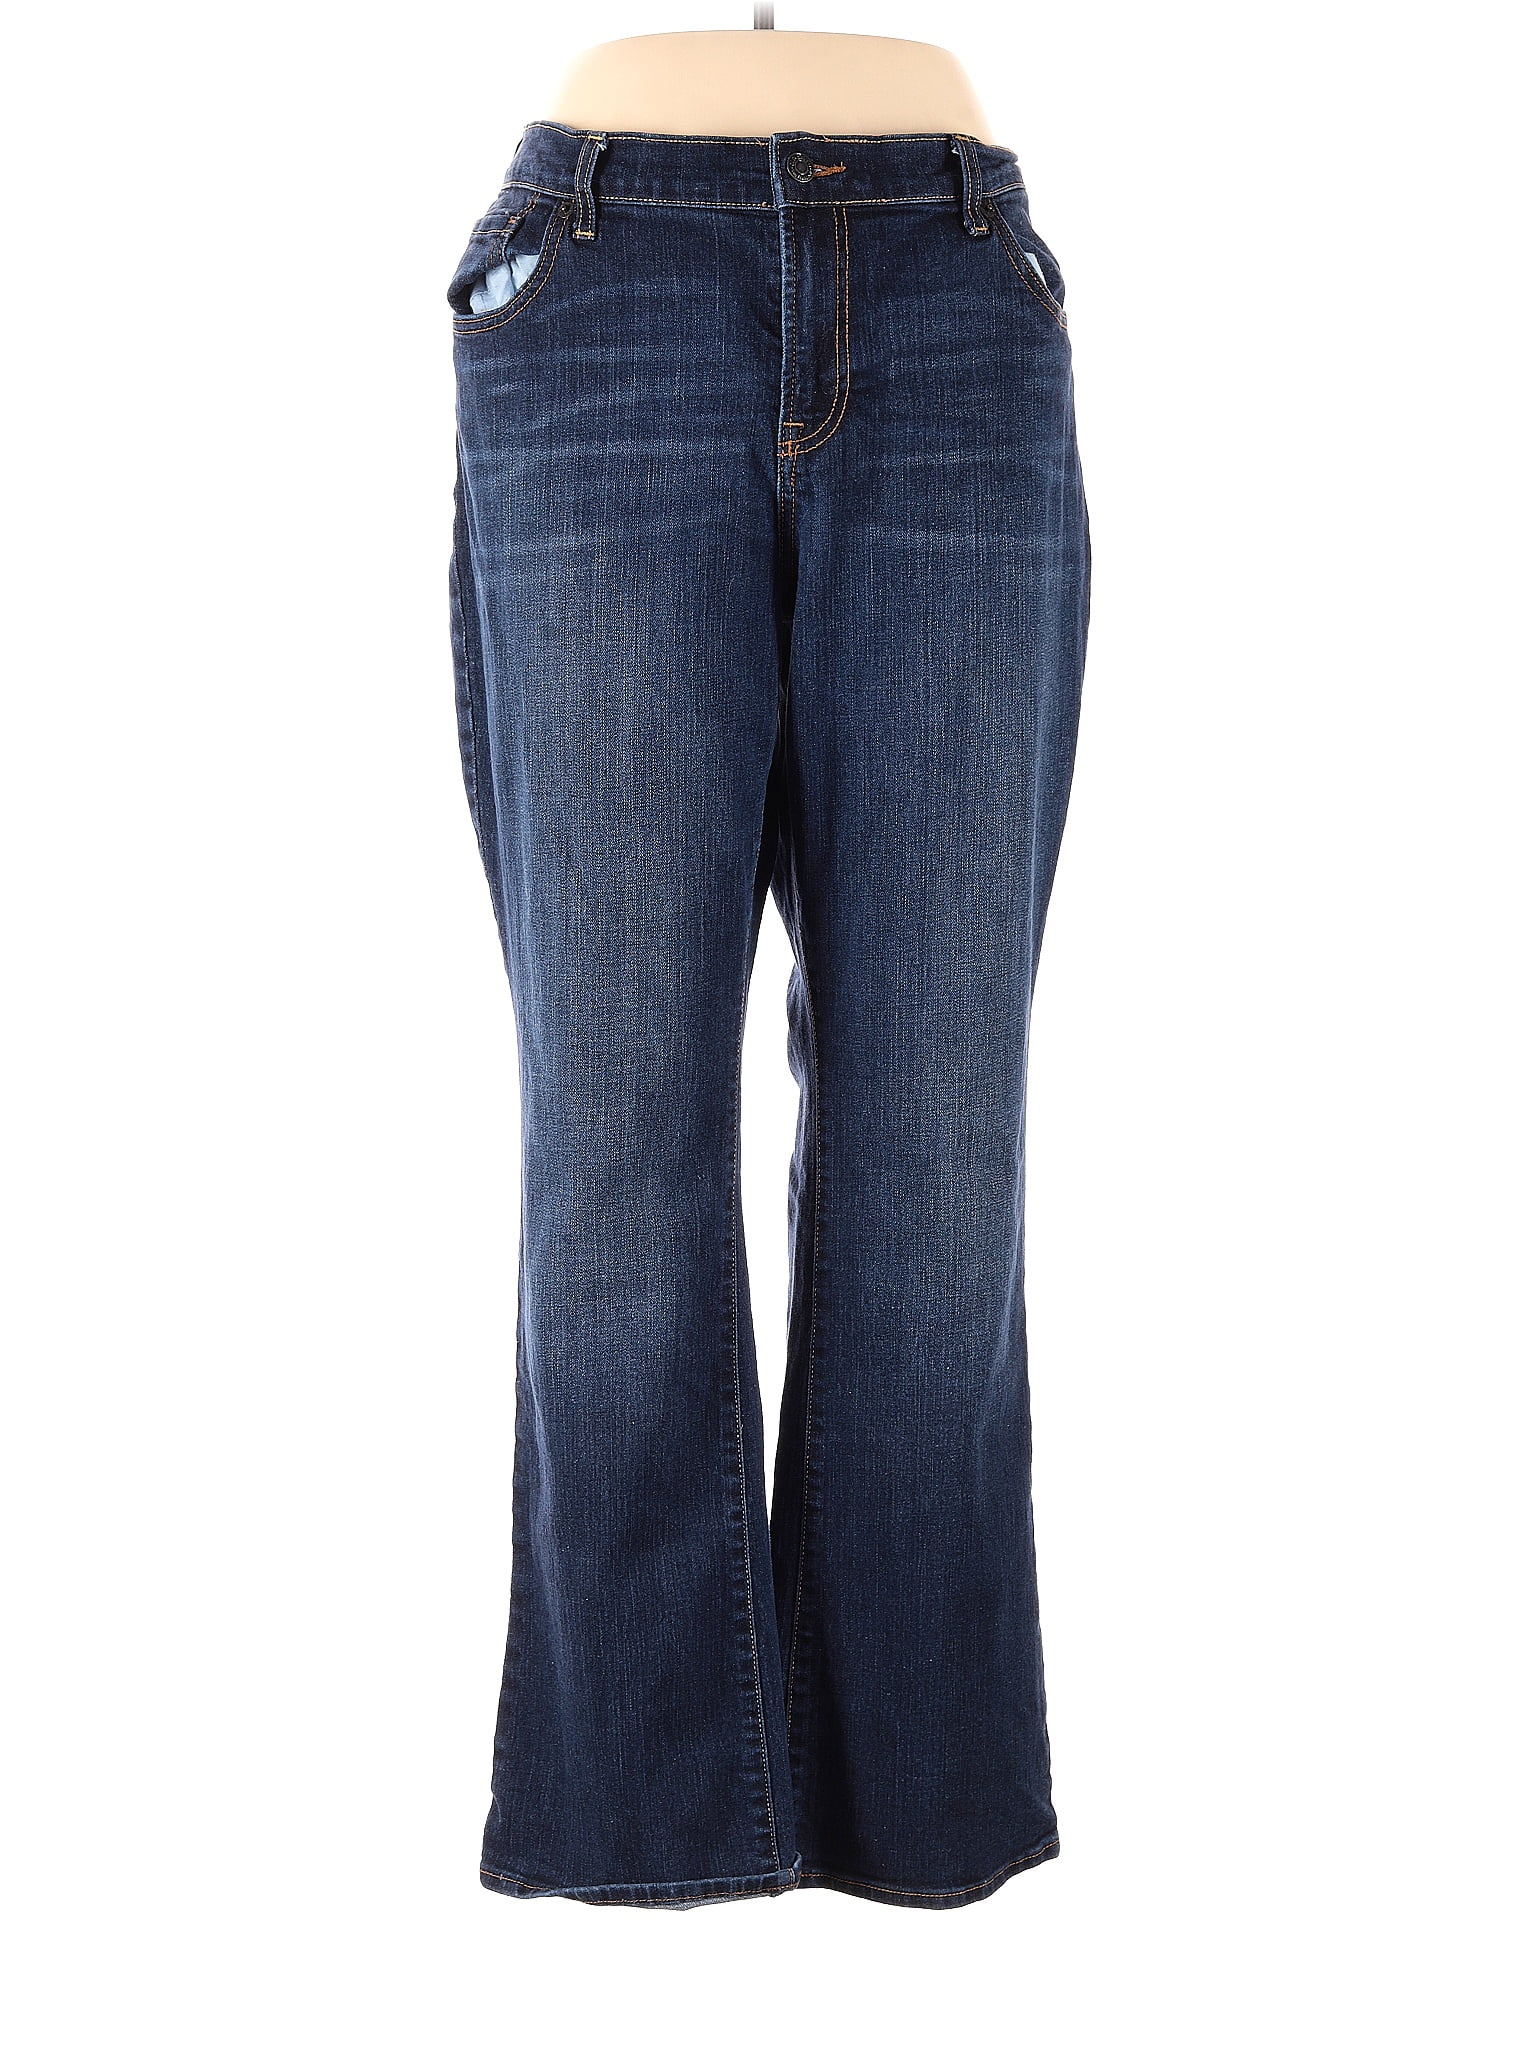 Old Navy Solid Blue Jeans Size 16 - 50% off